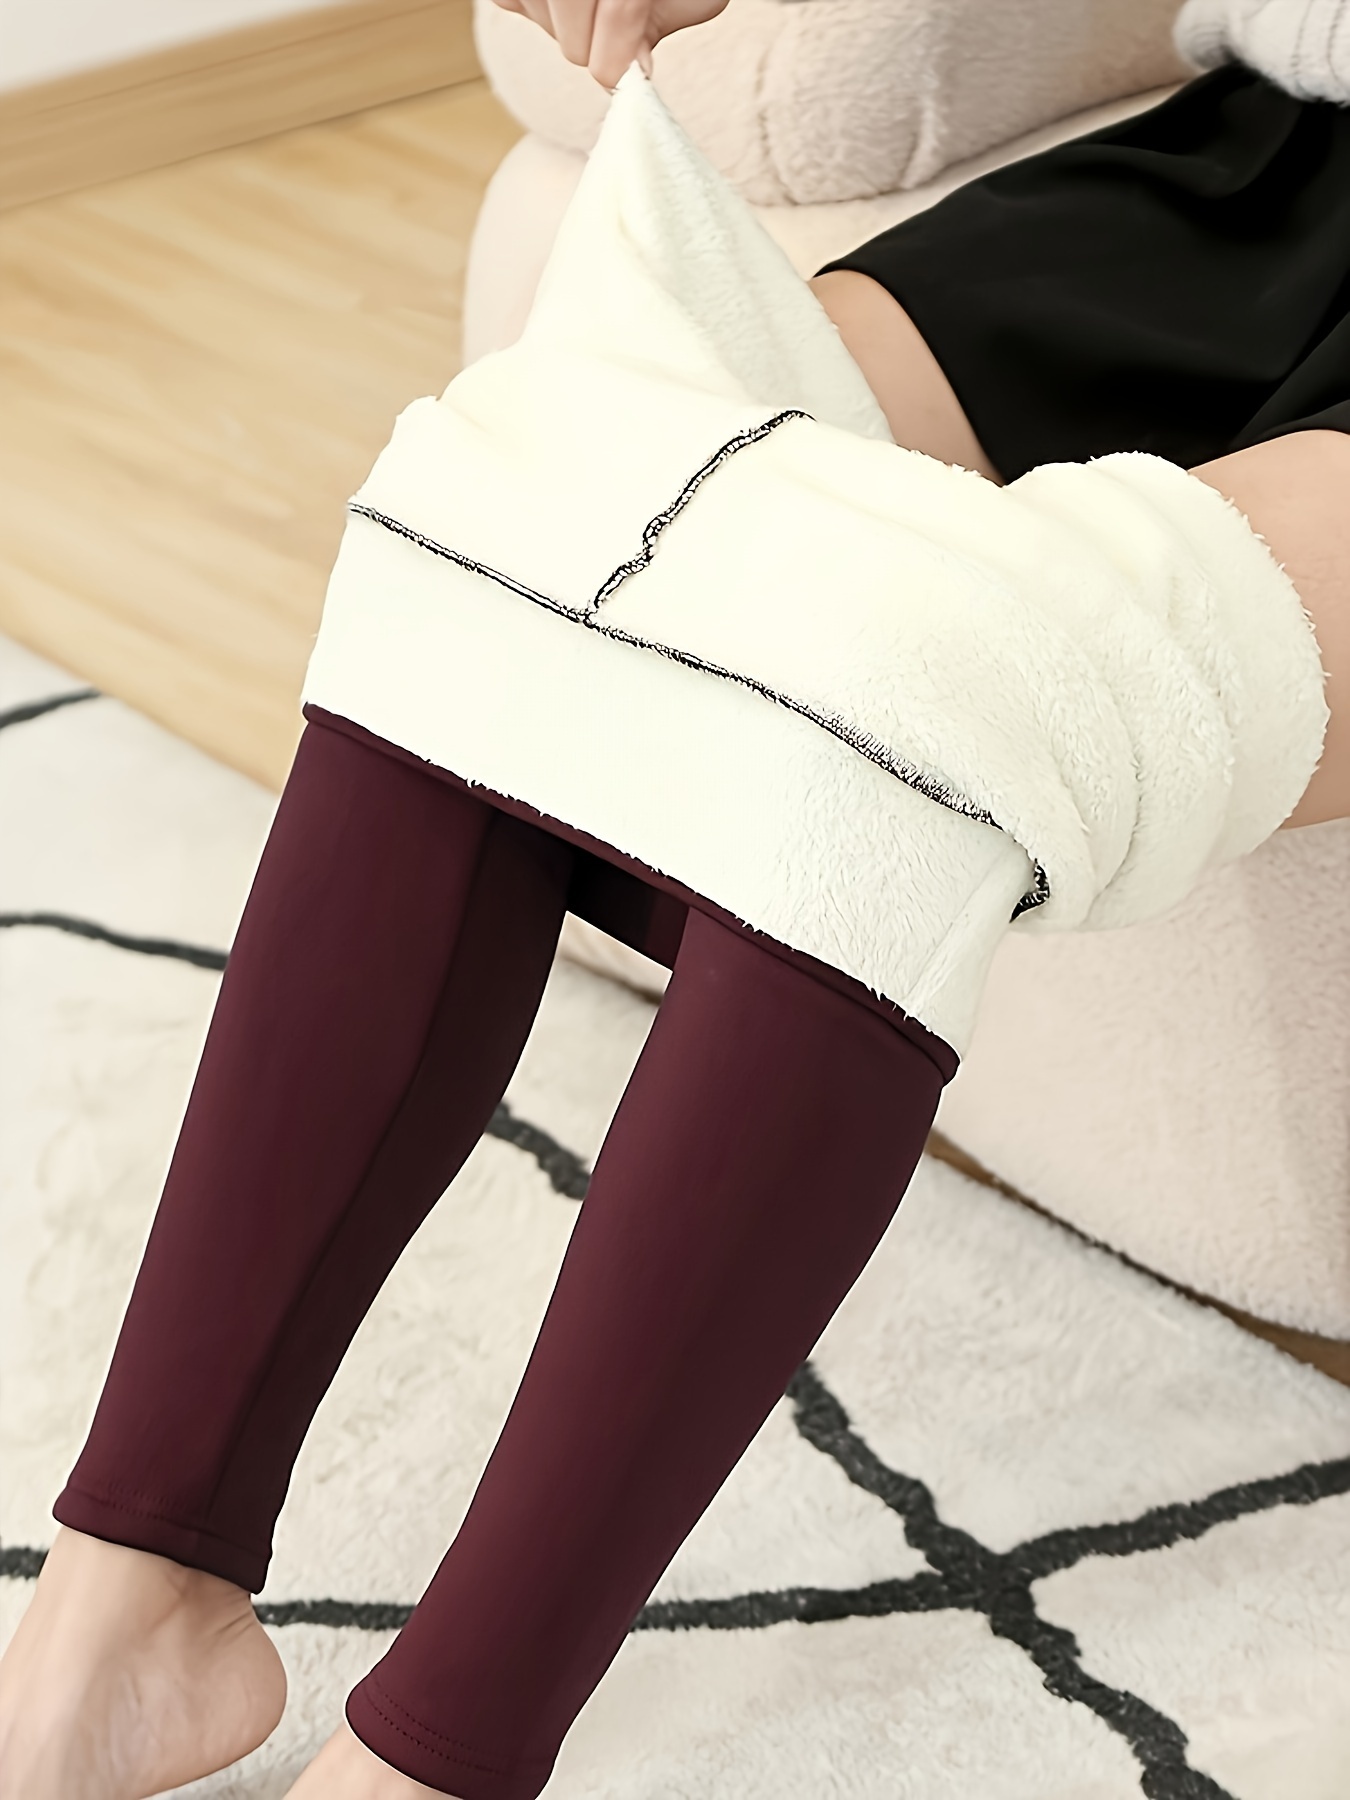 Warm Fleece Lining Leggings Solid Color Casual Stretchy Long